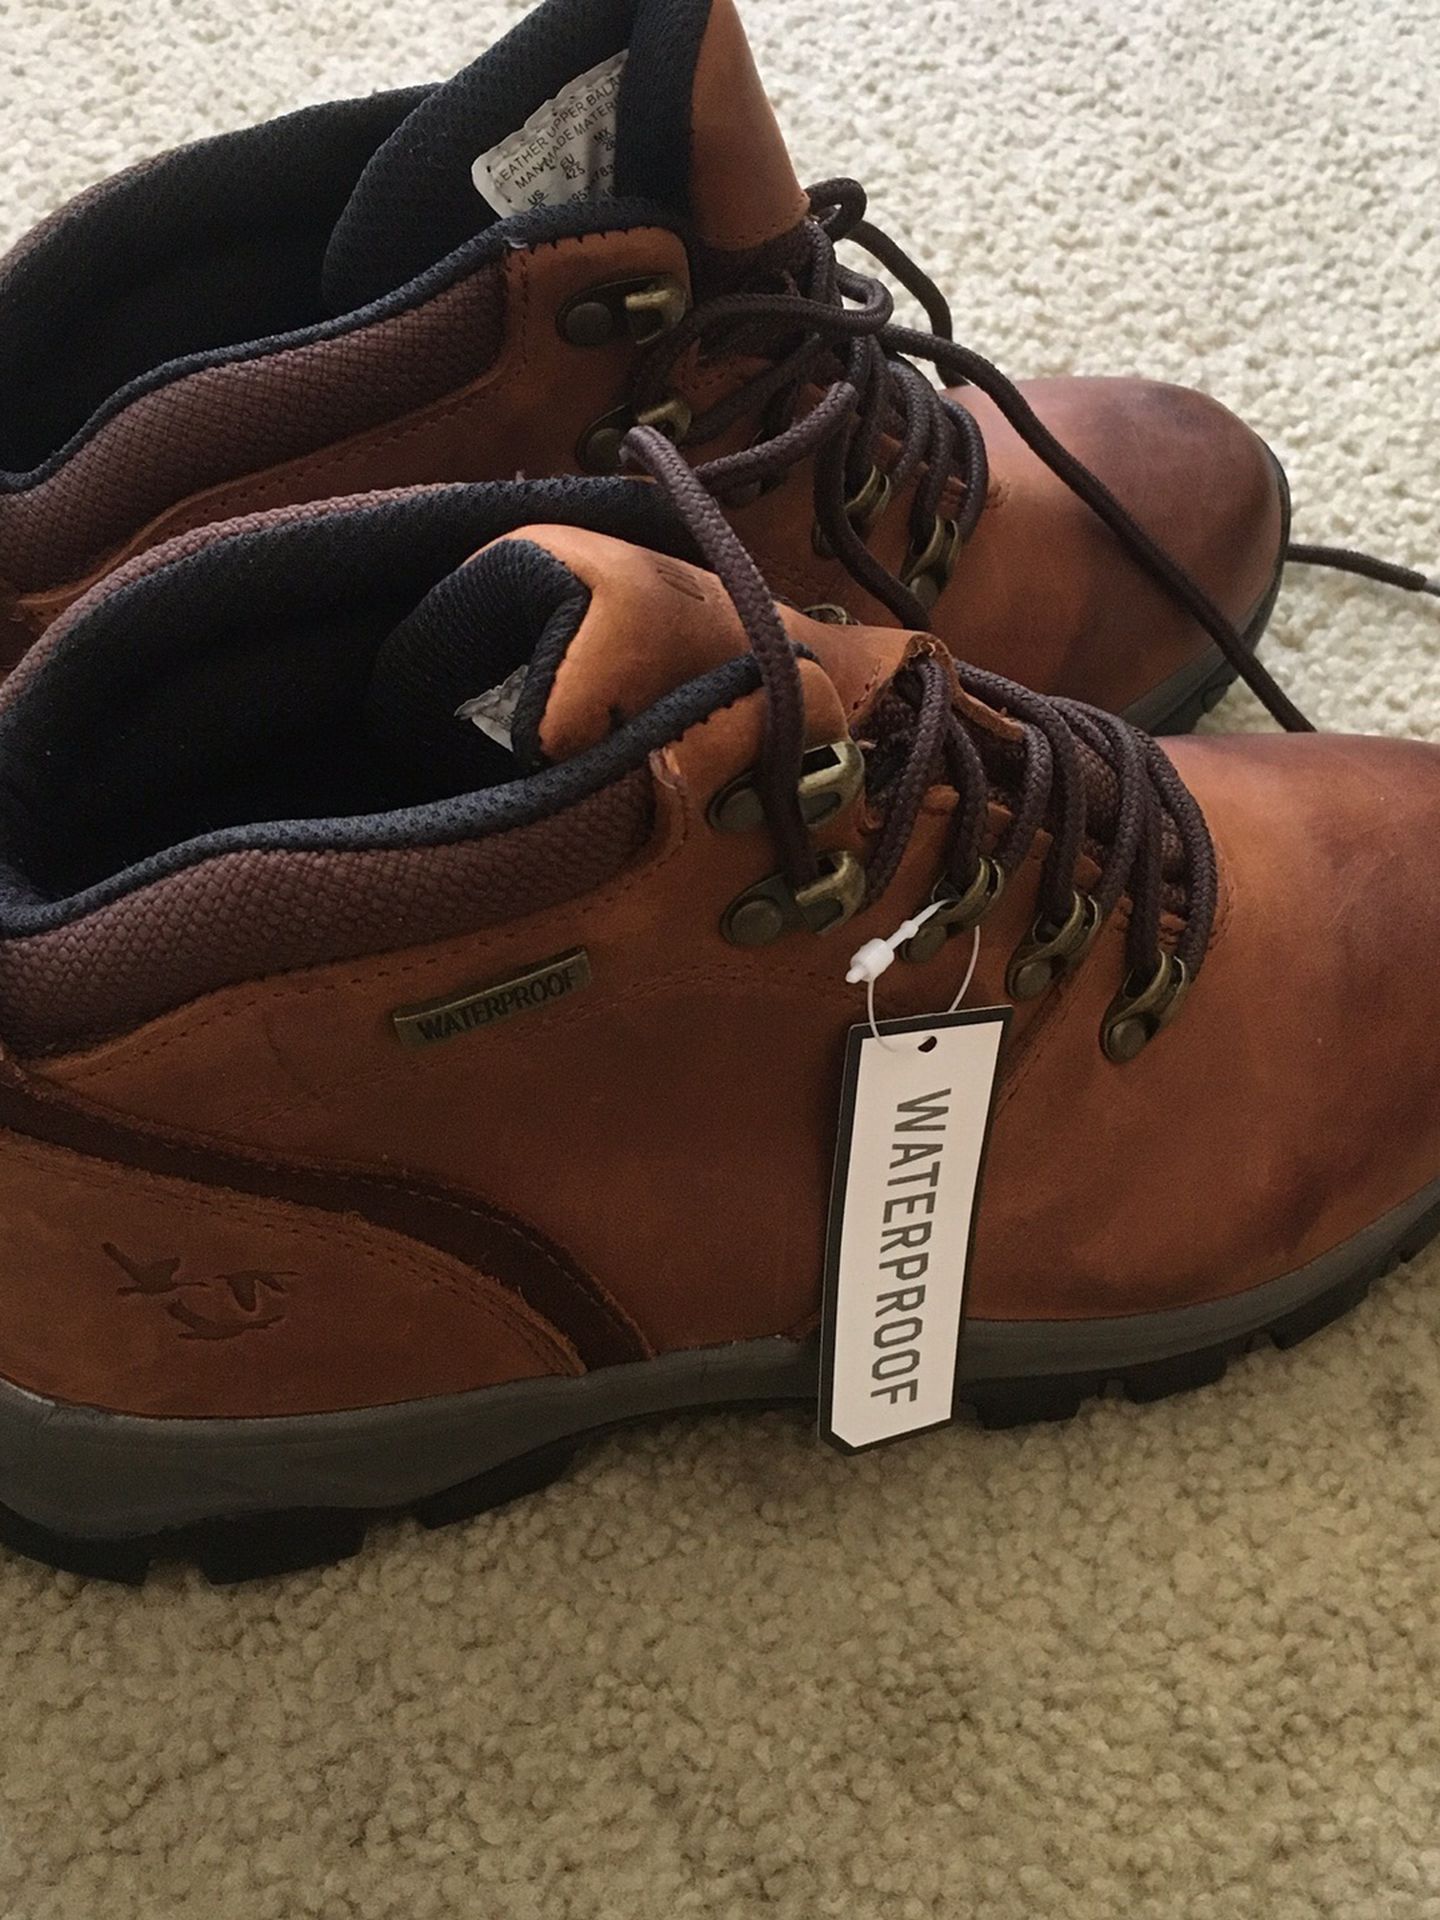 Mens Water Proof Boots! Size 9 New!!